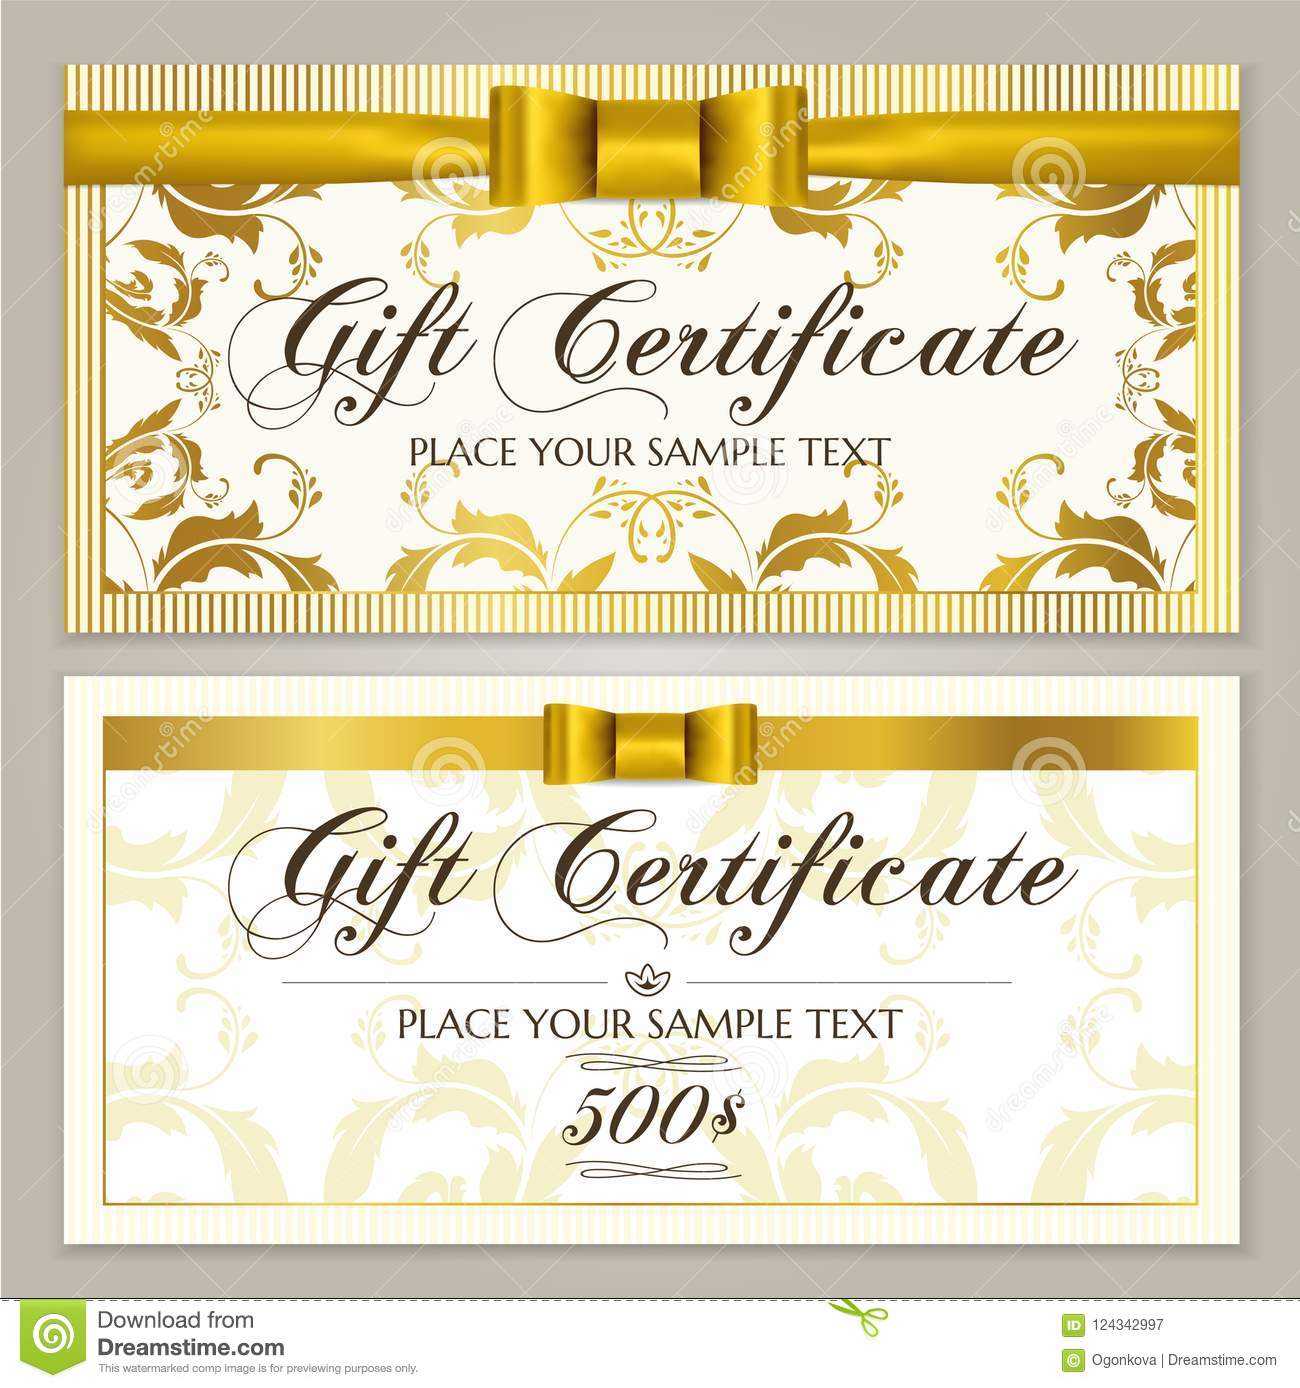 Gift Certificate Template Gift Voucher Layout, Coupon For Restaurant Gift Certificate Template